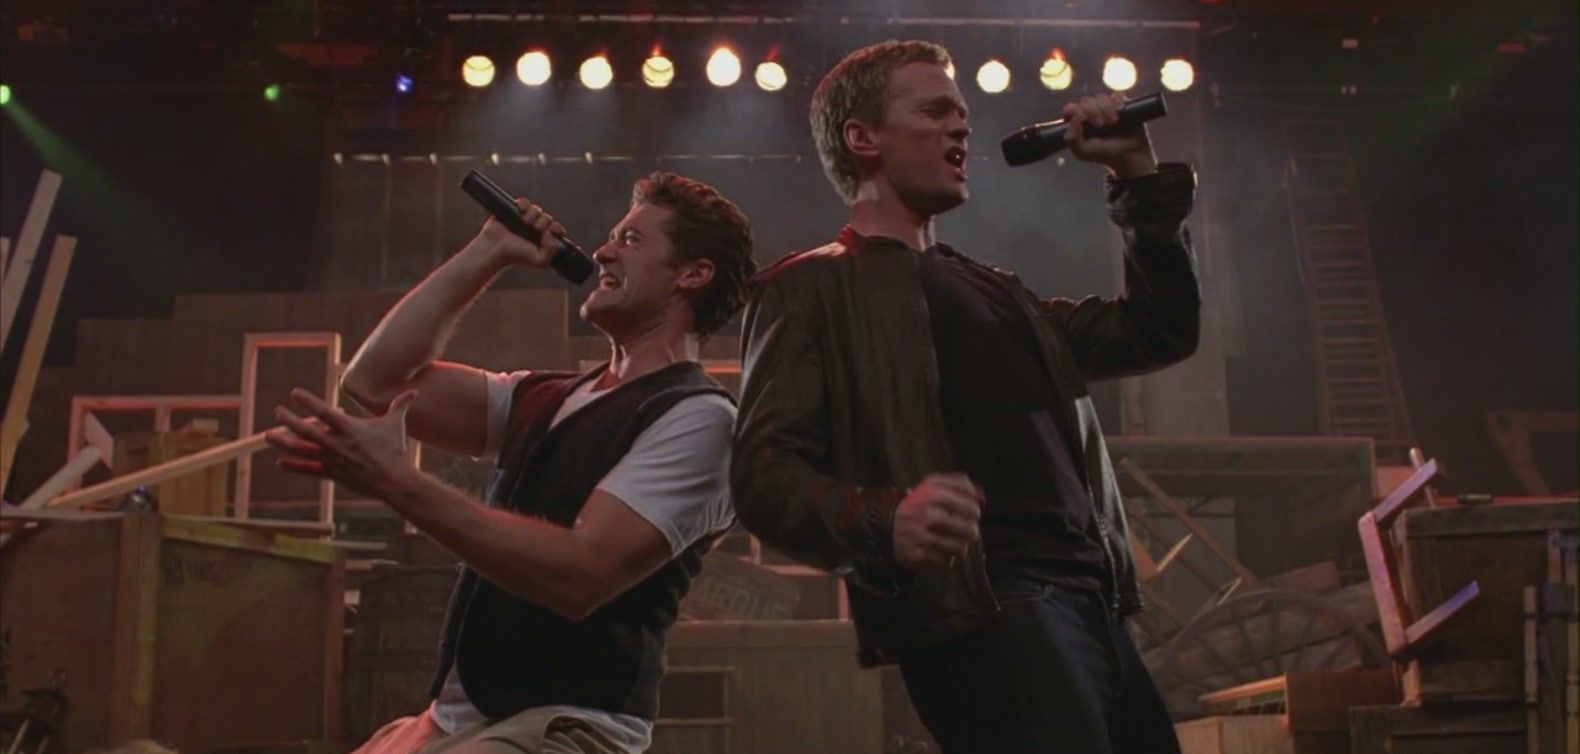 Will and Bryan Ryan sining on stage in Glee